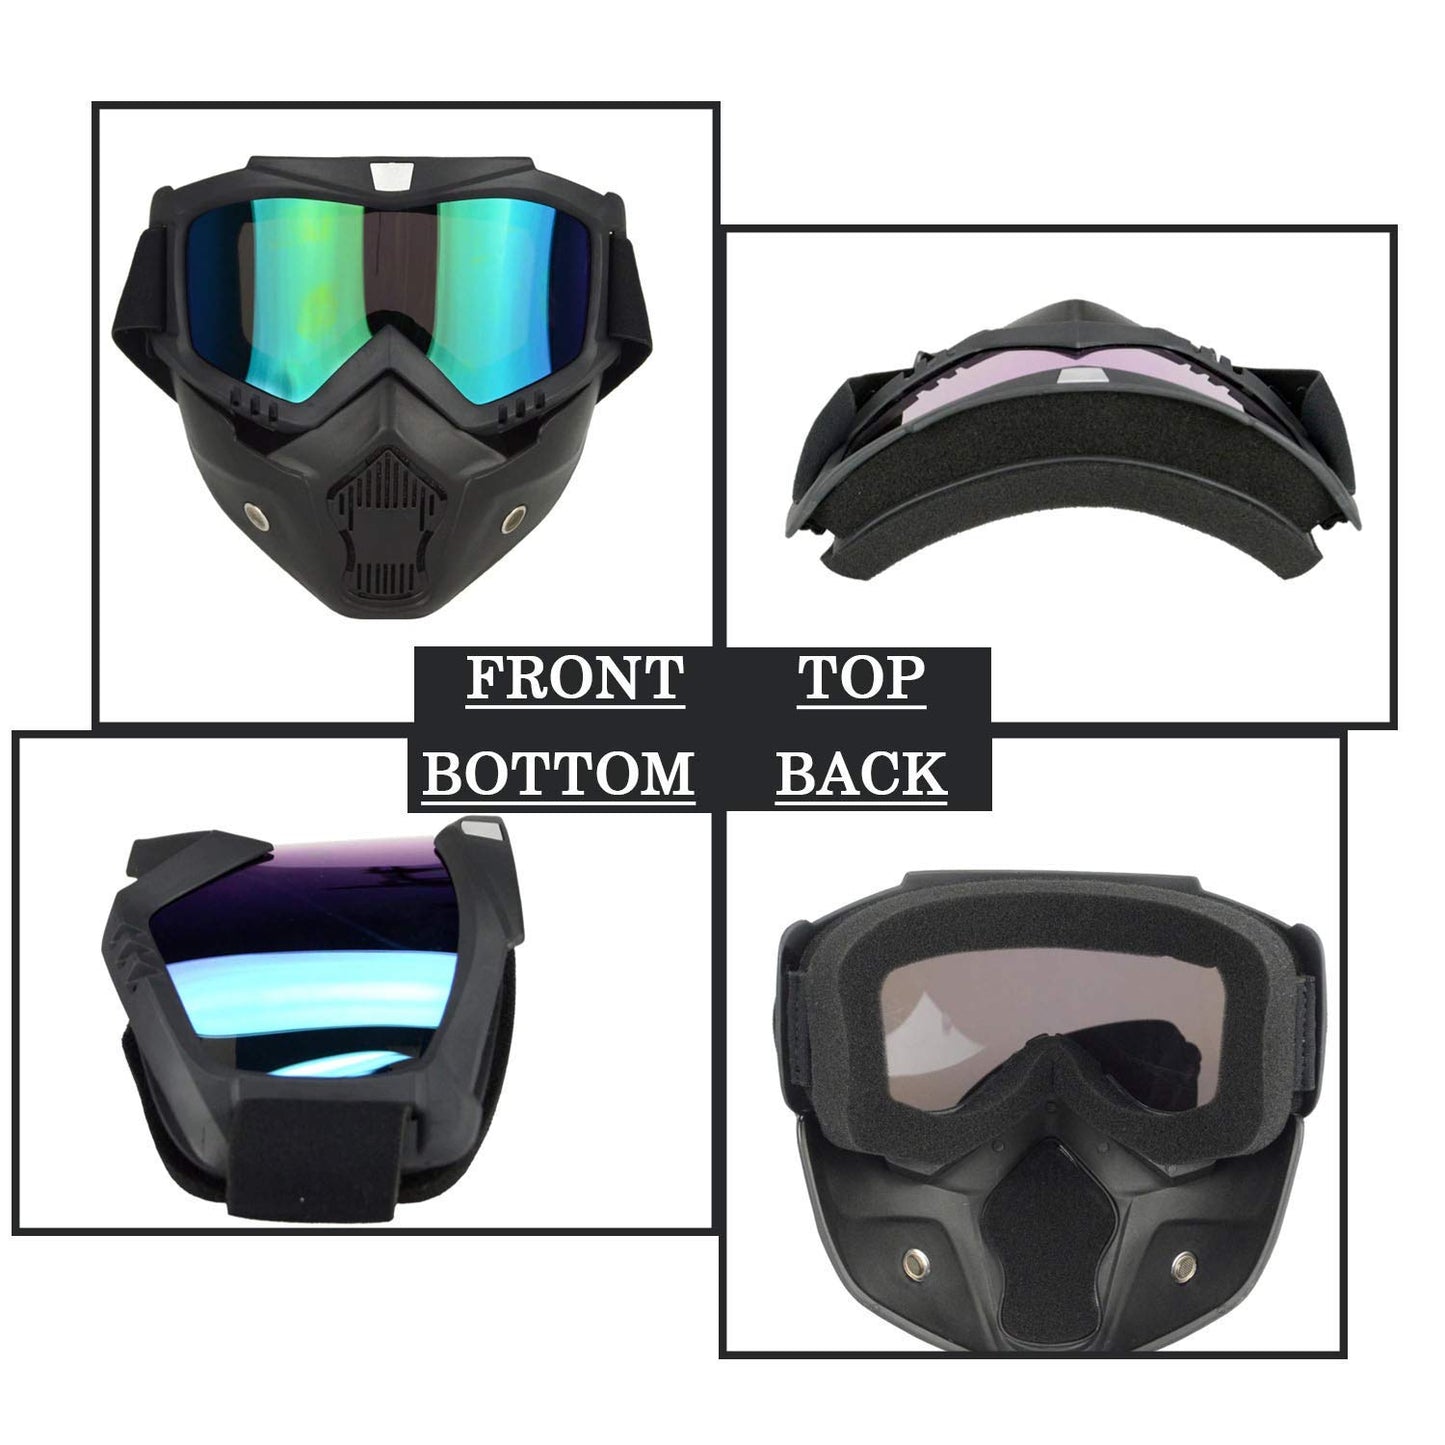 Motorcycle Goggle mask Anti Scratch UV Protective Face Mask, Bike Riding Goggles Mask With Detachable Face Mask, Adjustable Elastic Strap Goggles Mask For Helmet - Rainbow Visor